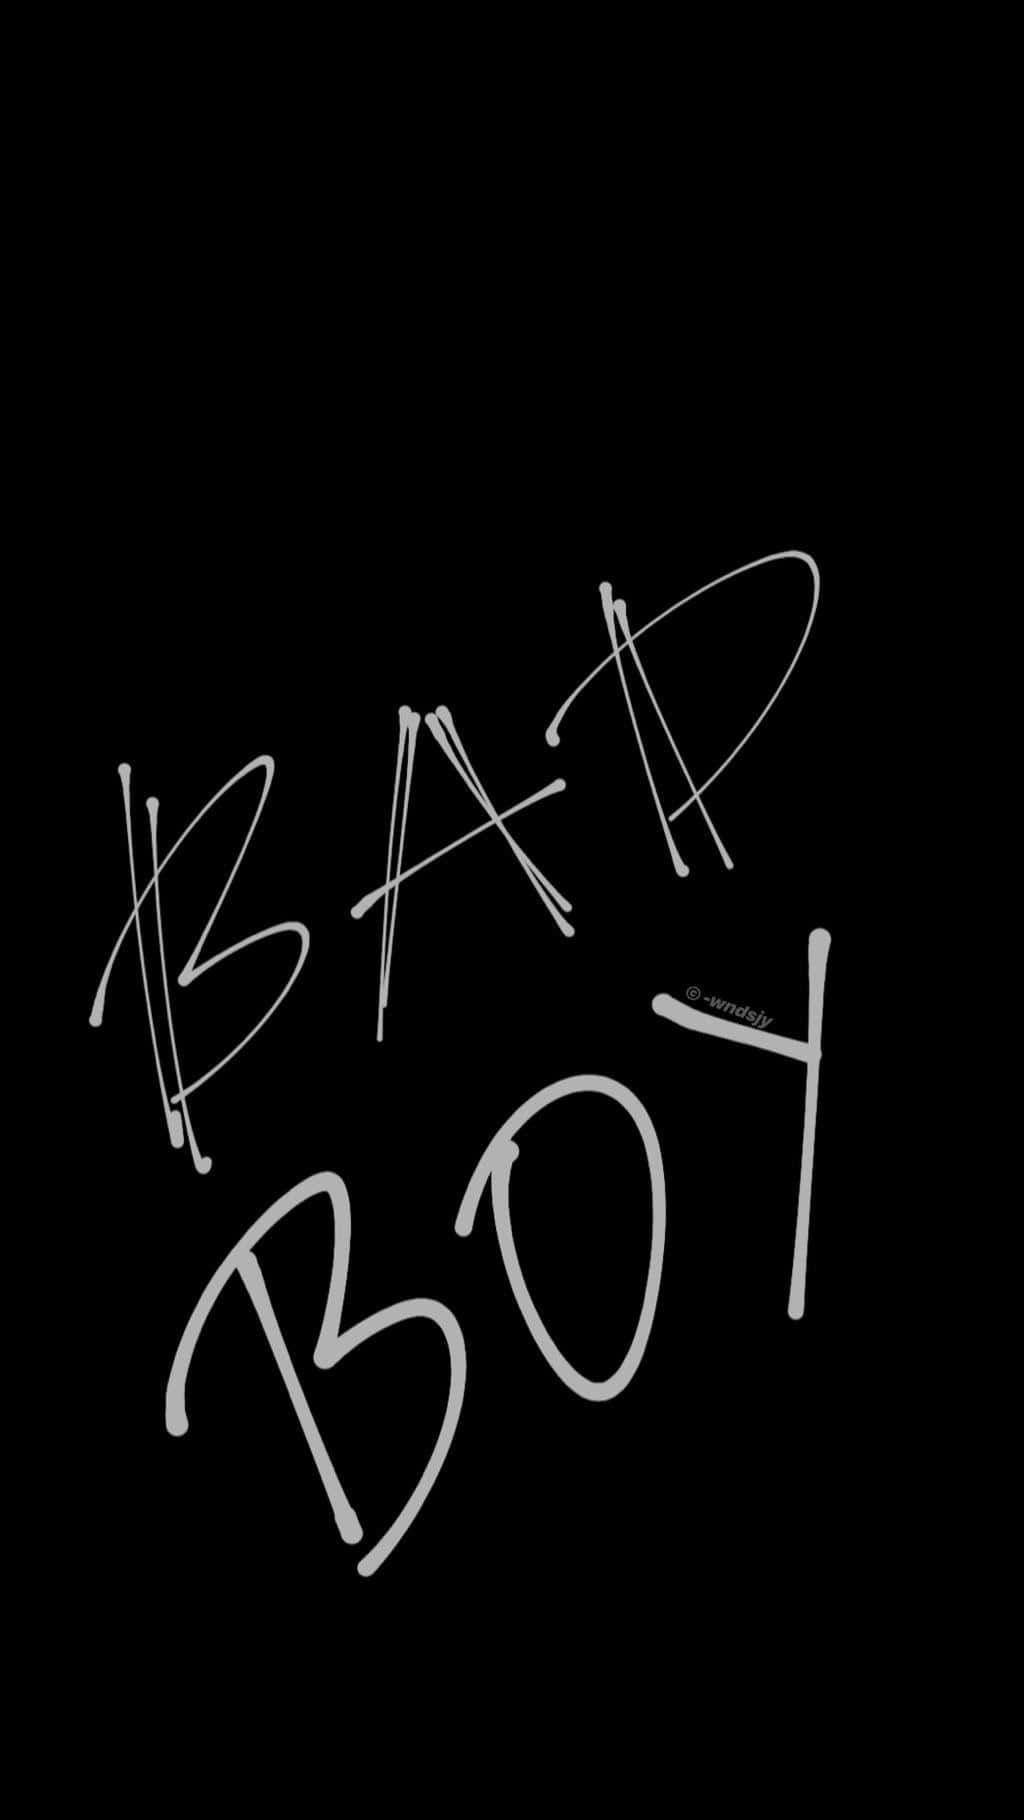 Bad Boy - A Black Background With The Word Written On It